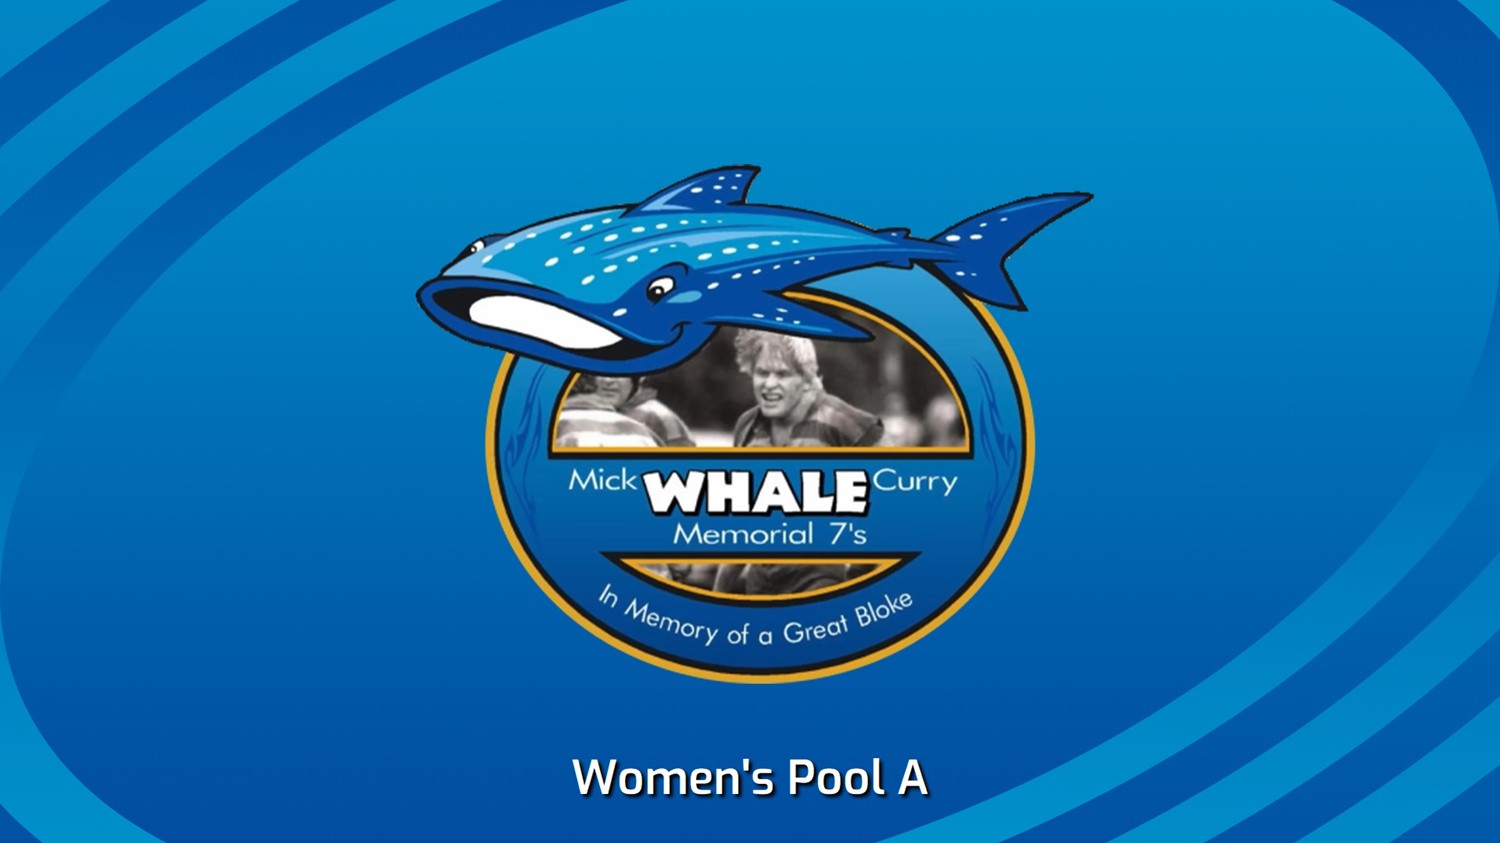 240210-Mick "Whale" Curry Memorial Rugby Sevens Women's Pool A - Manly v Burraneer Rays Minigame Slate Image